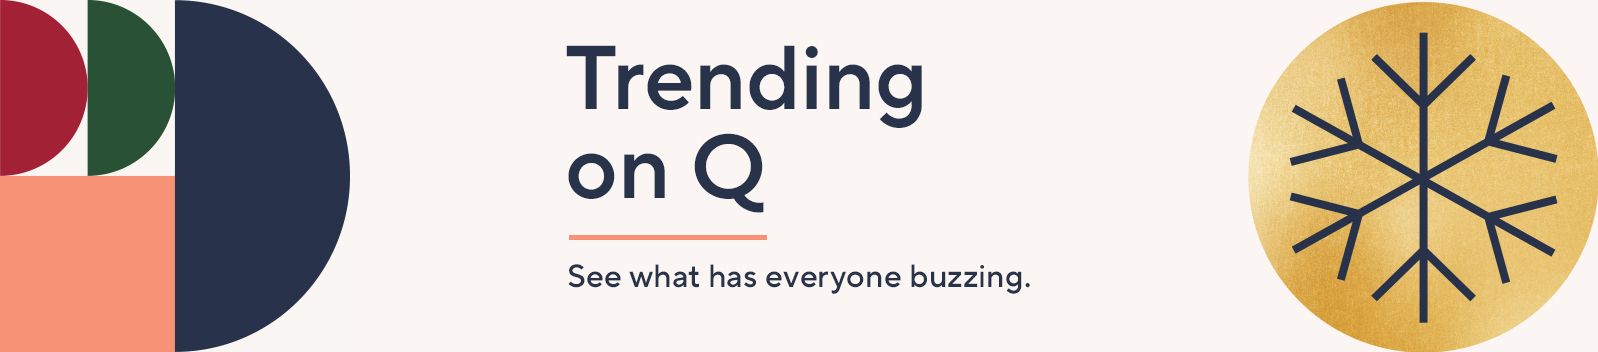 Trending on Q.  See what has everyone buzzing